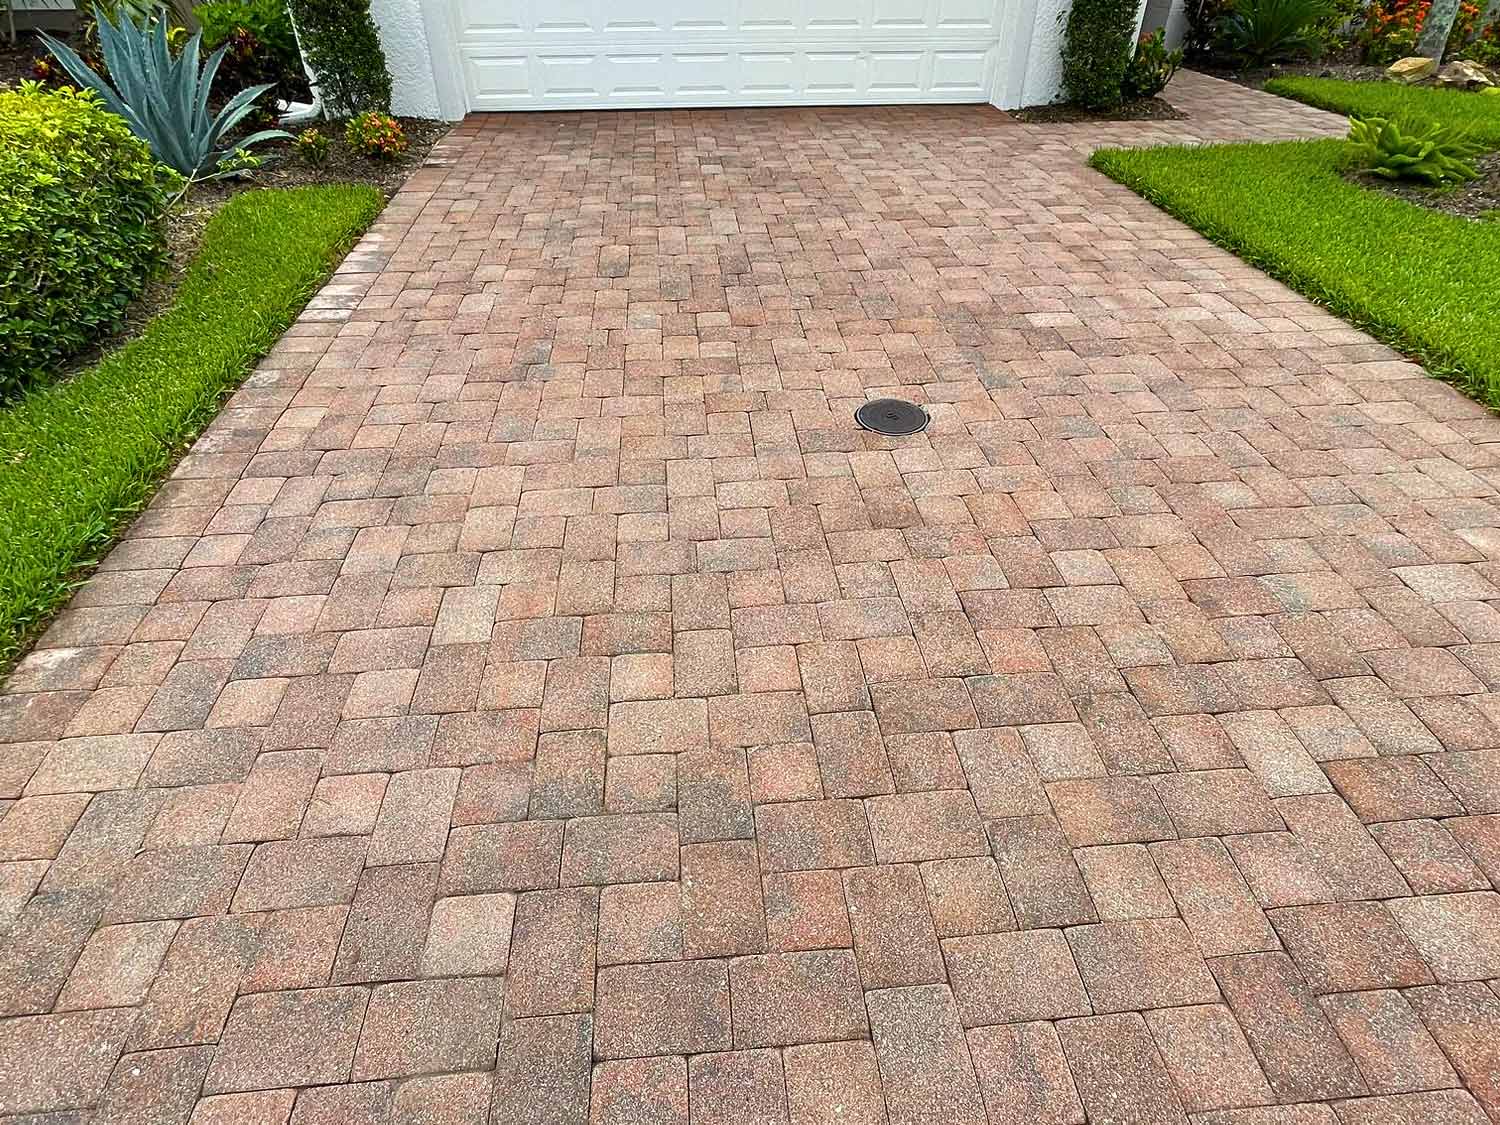 clean driveway with pavers after pressure washing